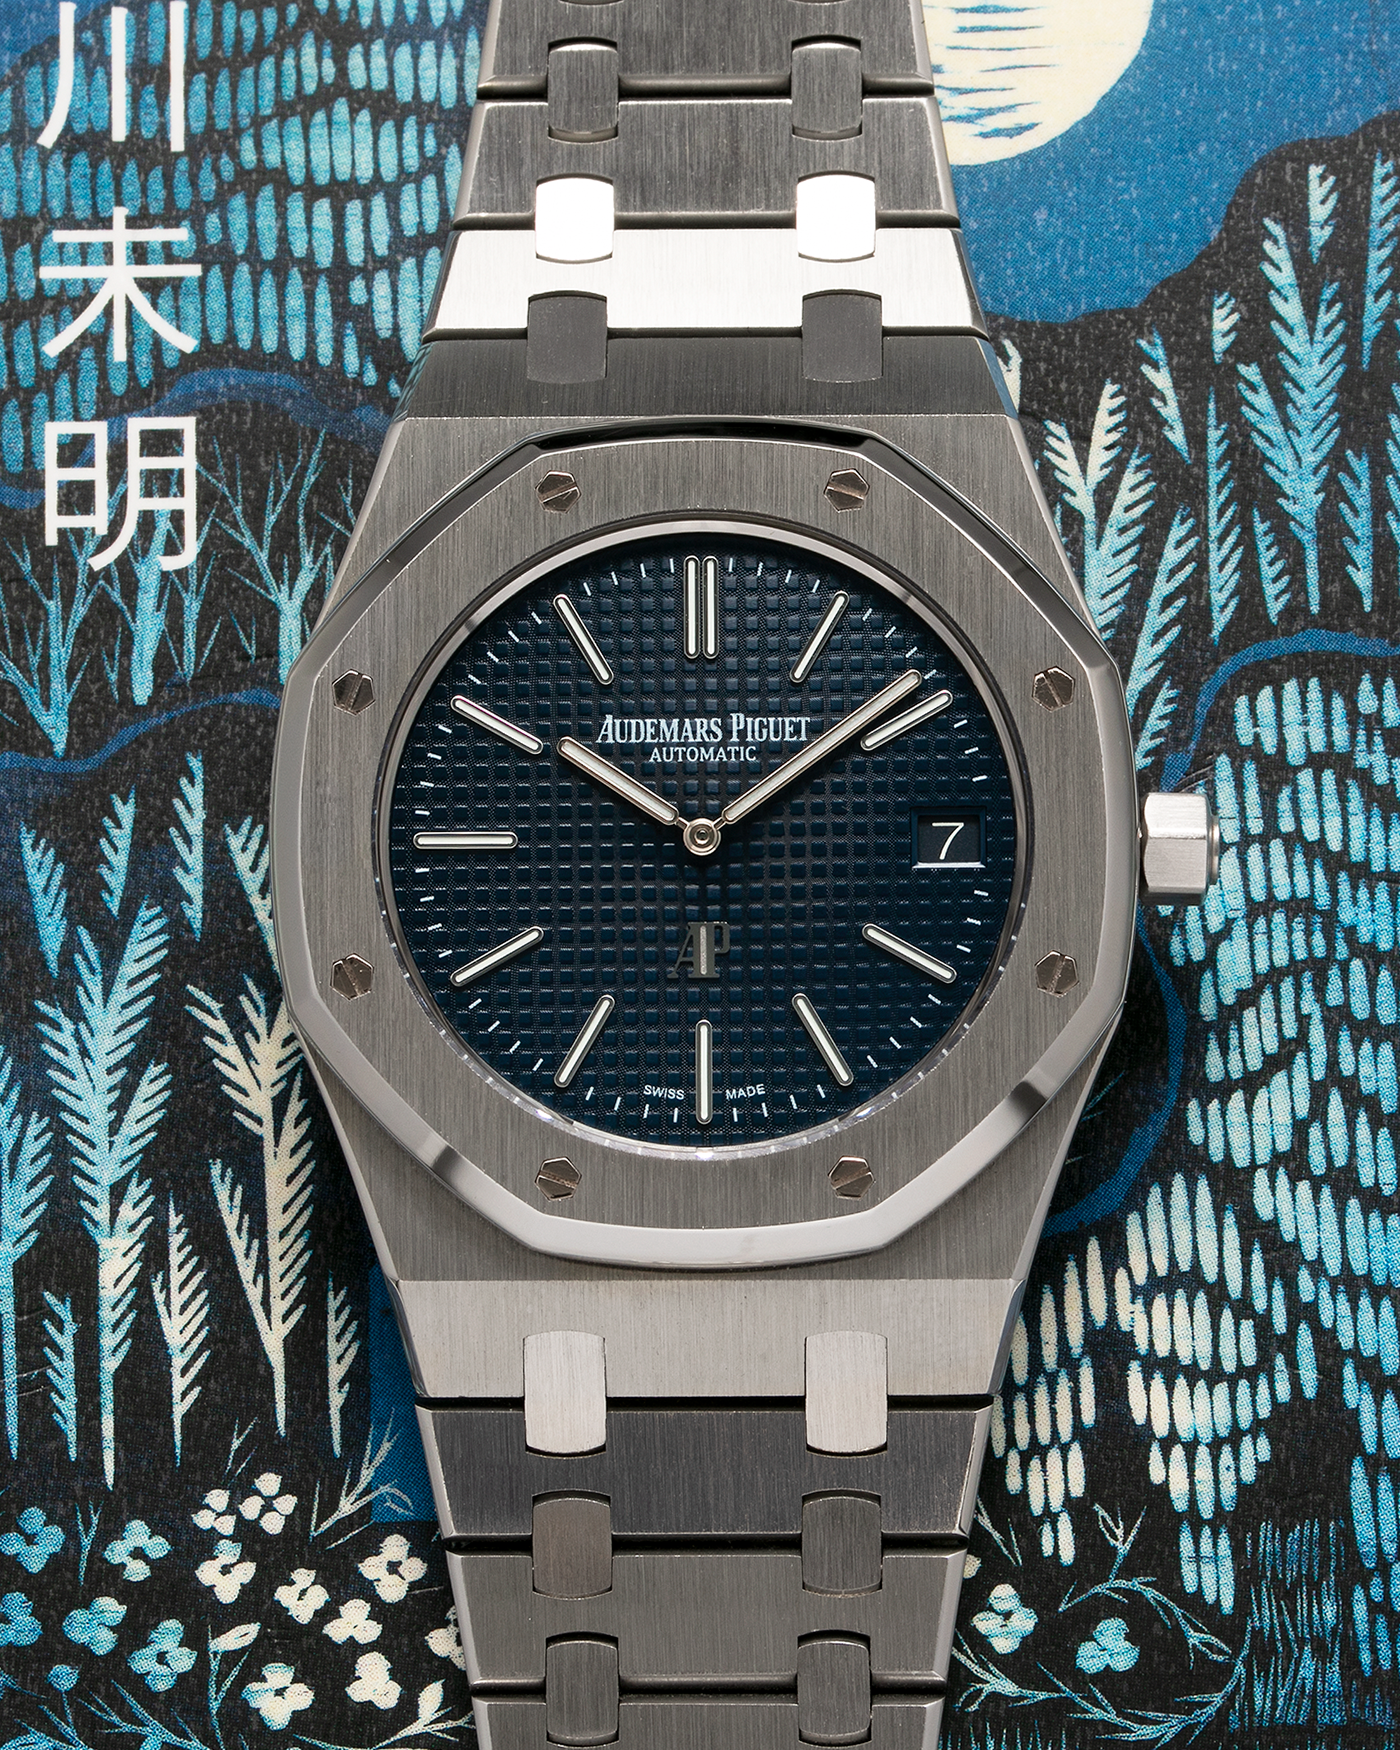 Brand: Audemars Piguet Year: 2014 Model: Royal Oak Reference Number: 15202ST.OO.1240ST.01 Material: Stainless Steel Movement: Audemars Piguet Cal. 2121 (Derived from JLC Cal. 920), Self-Winding Case Dimensions: 39mm x 8.1mm Bracelet: Audemars Piguet Stainless Steel Integrated Bracelet